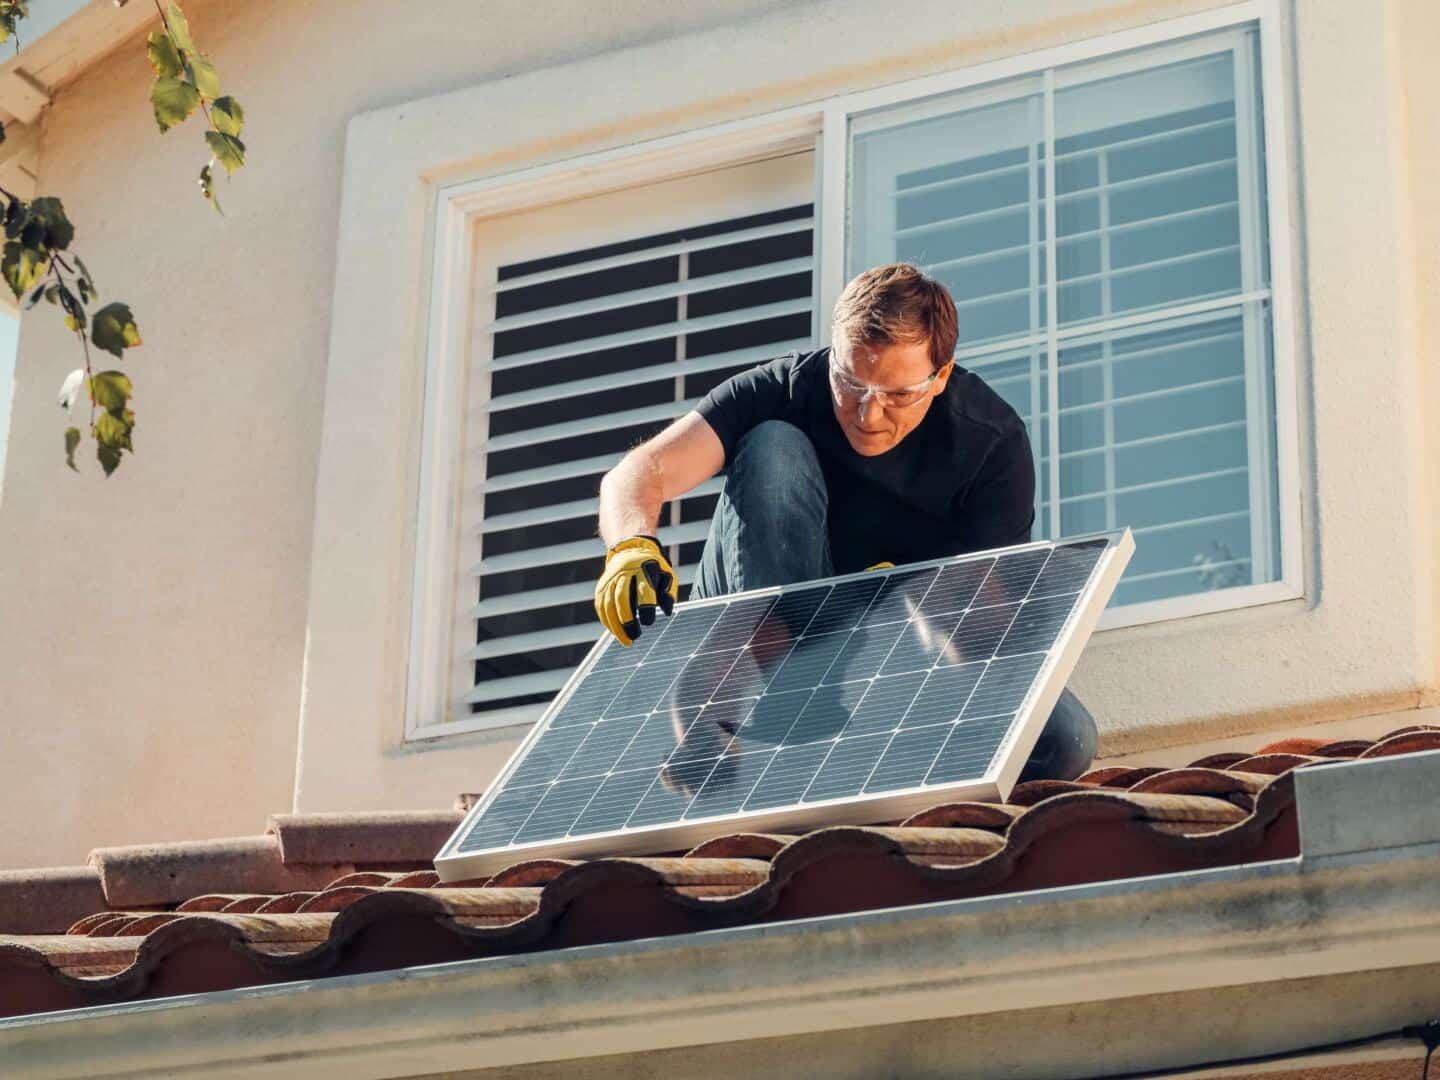 A man installing solar panels on a roof to help reduce heating bills